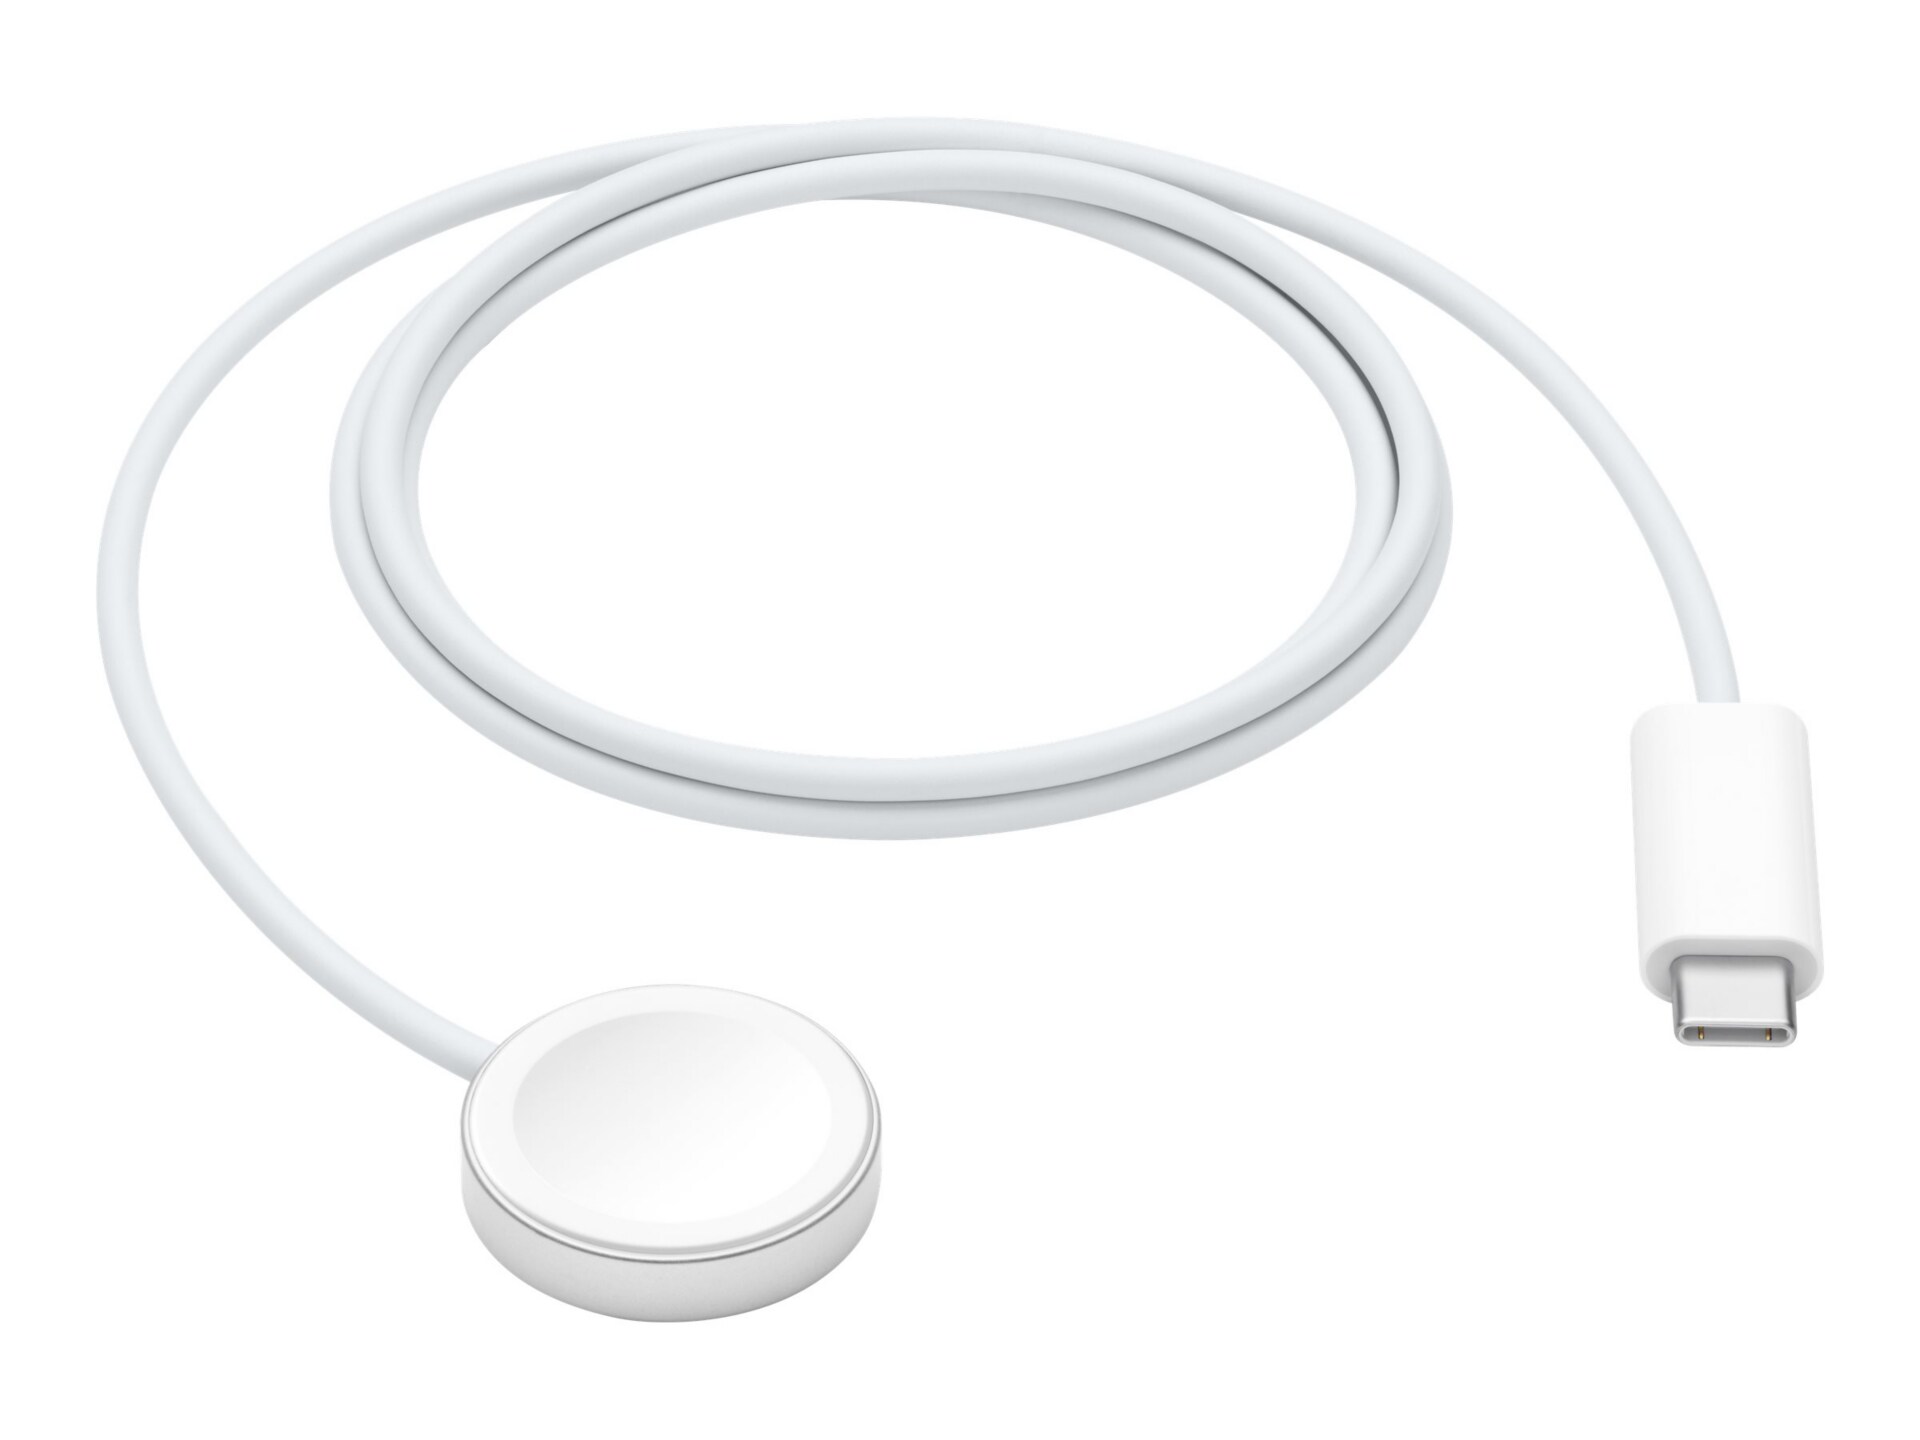 Apple Magnetic - smart watch charging cable - 3.3 ft